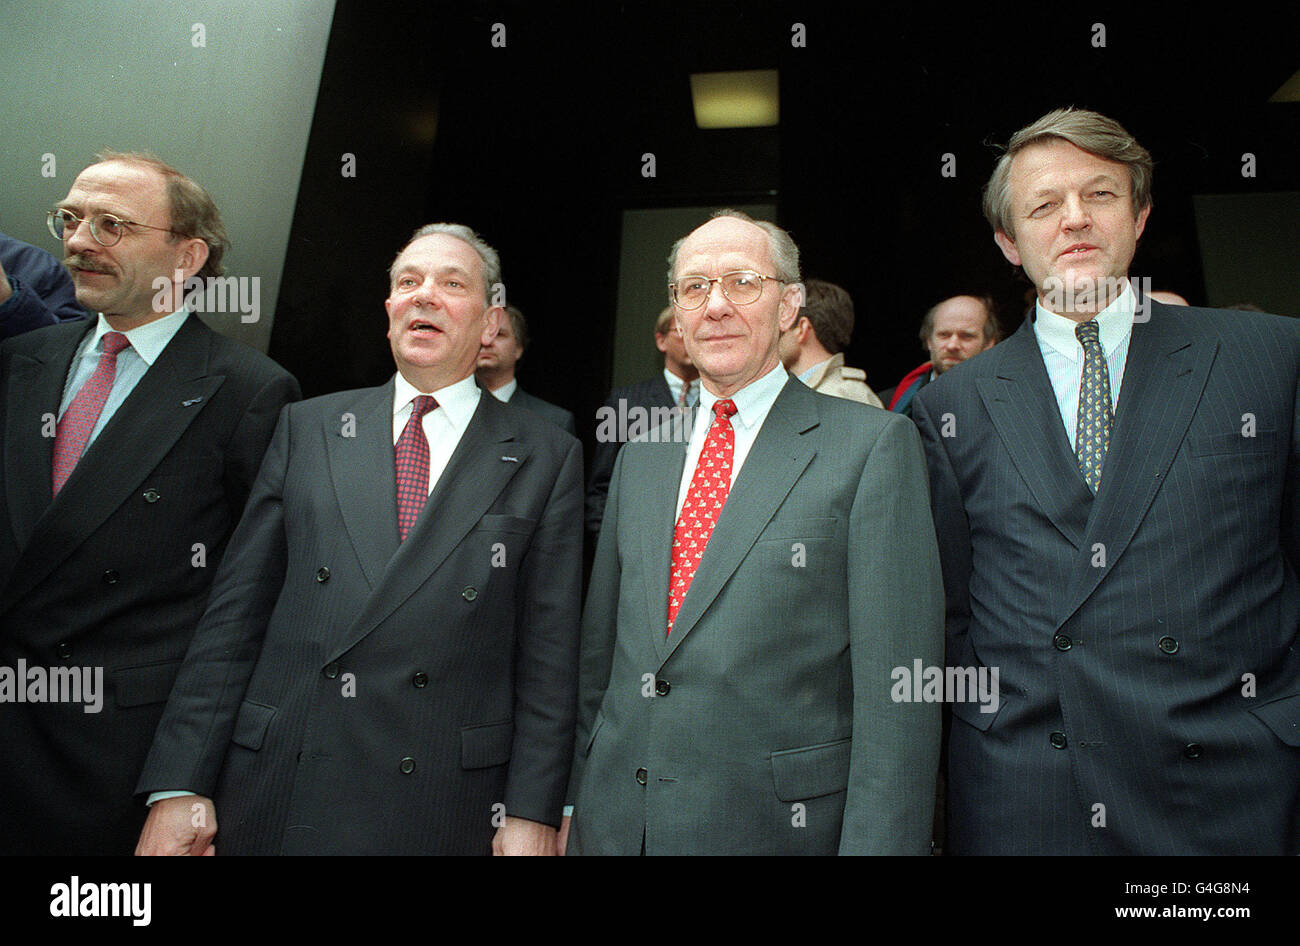 PA NEWS PHOTO 6/3/95  FROM LEFT TO RIGHT CEES MAAS, DIRECTOR AND CHIEF NEGOTIATOR, GODFRIED VAN DER LUGT, VICE CHAIRMAN, AAD JACOBS, CHAIRMAN, AND HESSEL LINDENBERGH, PROSPECT CHIEF EXECUTIVE, THE NEGOTIATORS OF DUTCH BANKING CONGLOMERATE ING. ARRIVE AT BARINGS BANK HEADQUARTERS IN BISHOPSGATE, LONDON Stock Photo